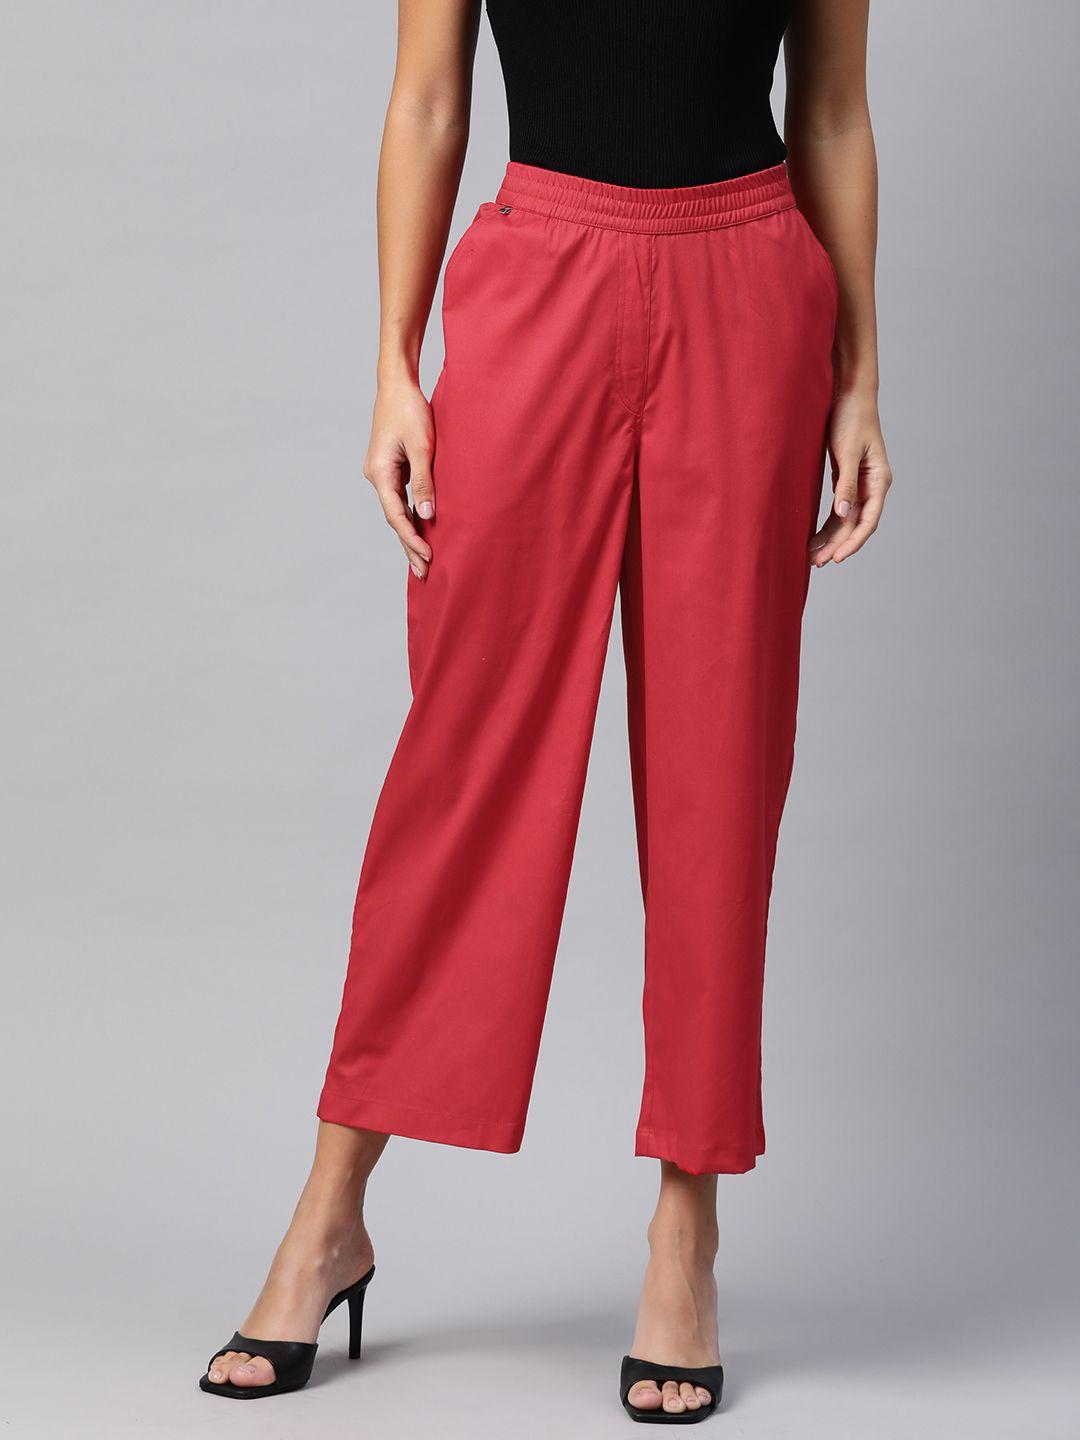 readiprint fashions straight fit high-rise culottes trousers